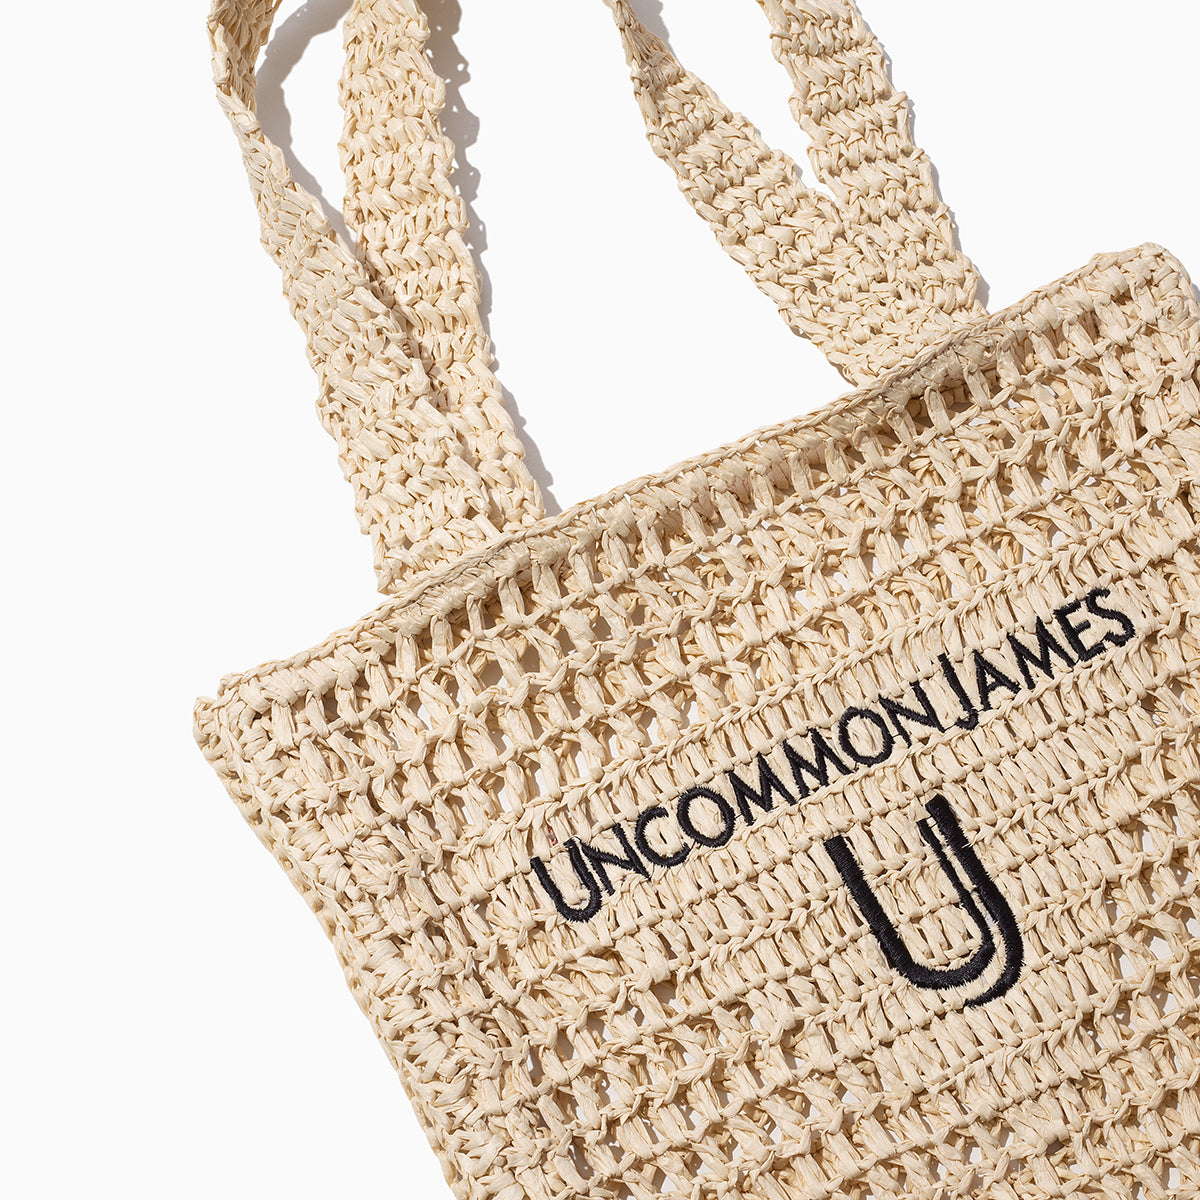 Straw Tote Bag | Product Detail Image | Uncommon James Home